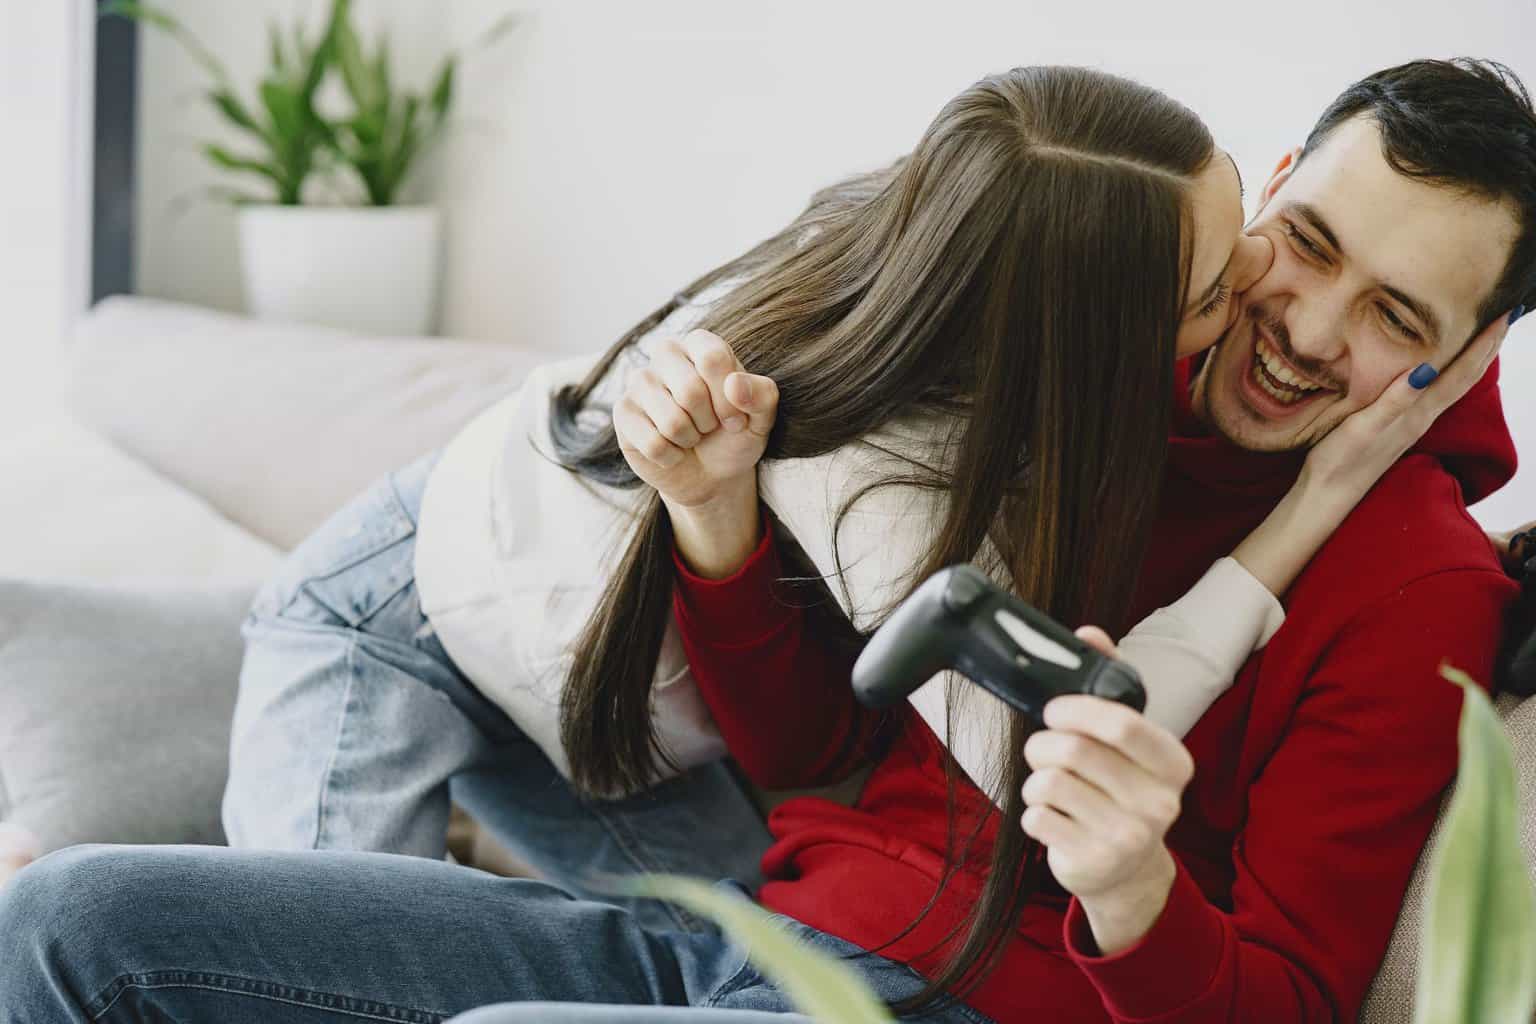 Games to Play with Your Girlfriend at Home